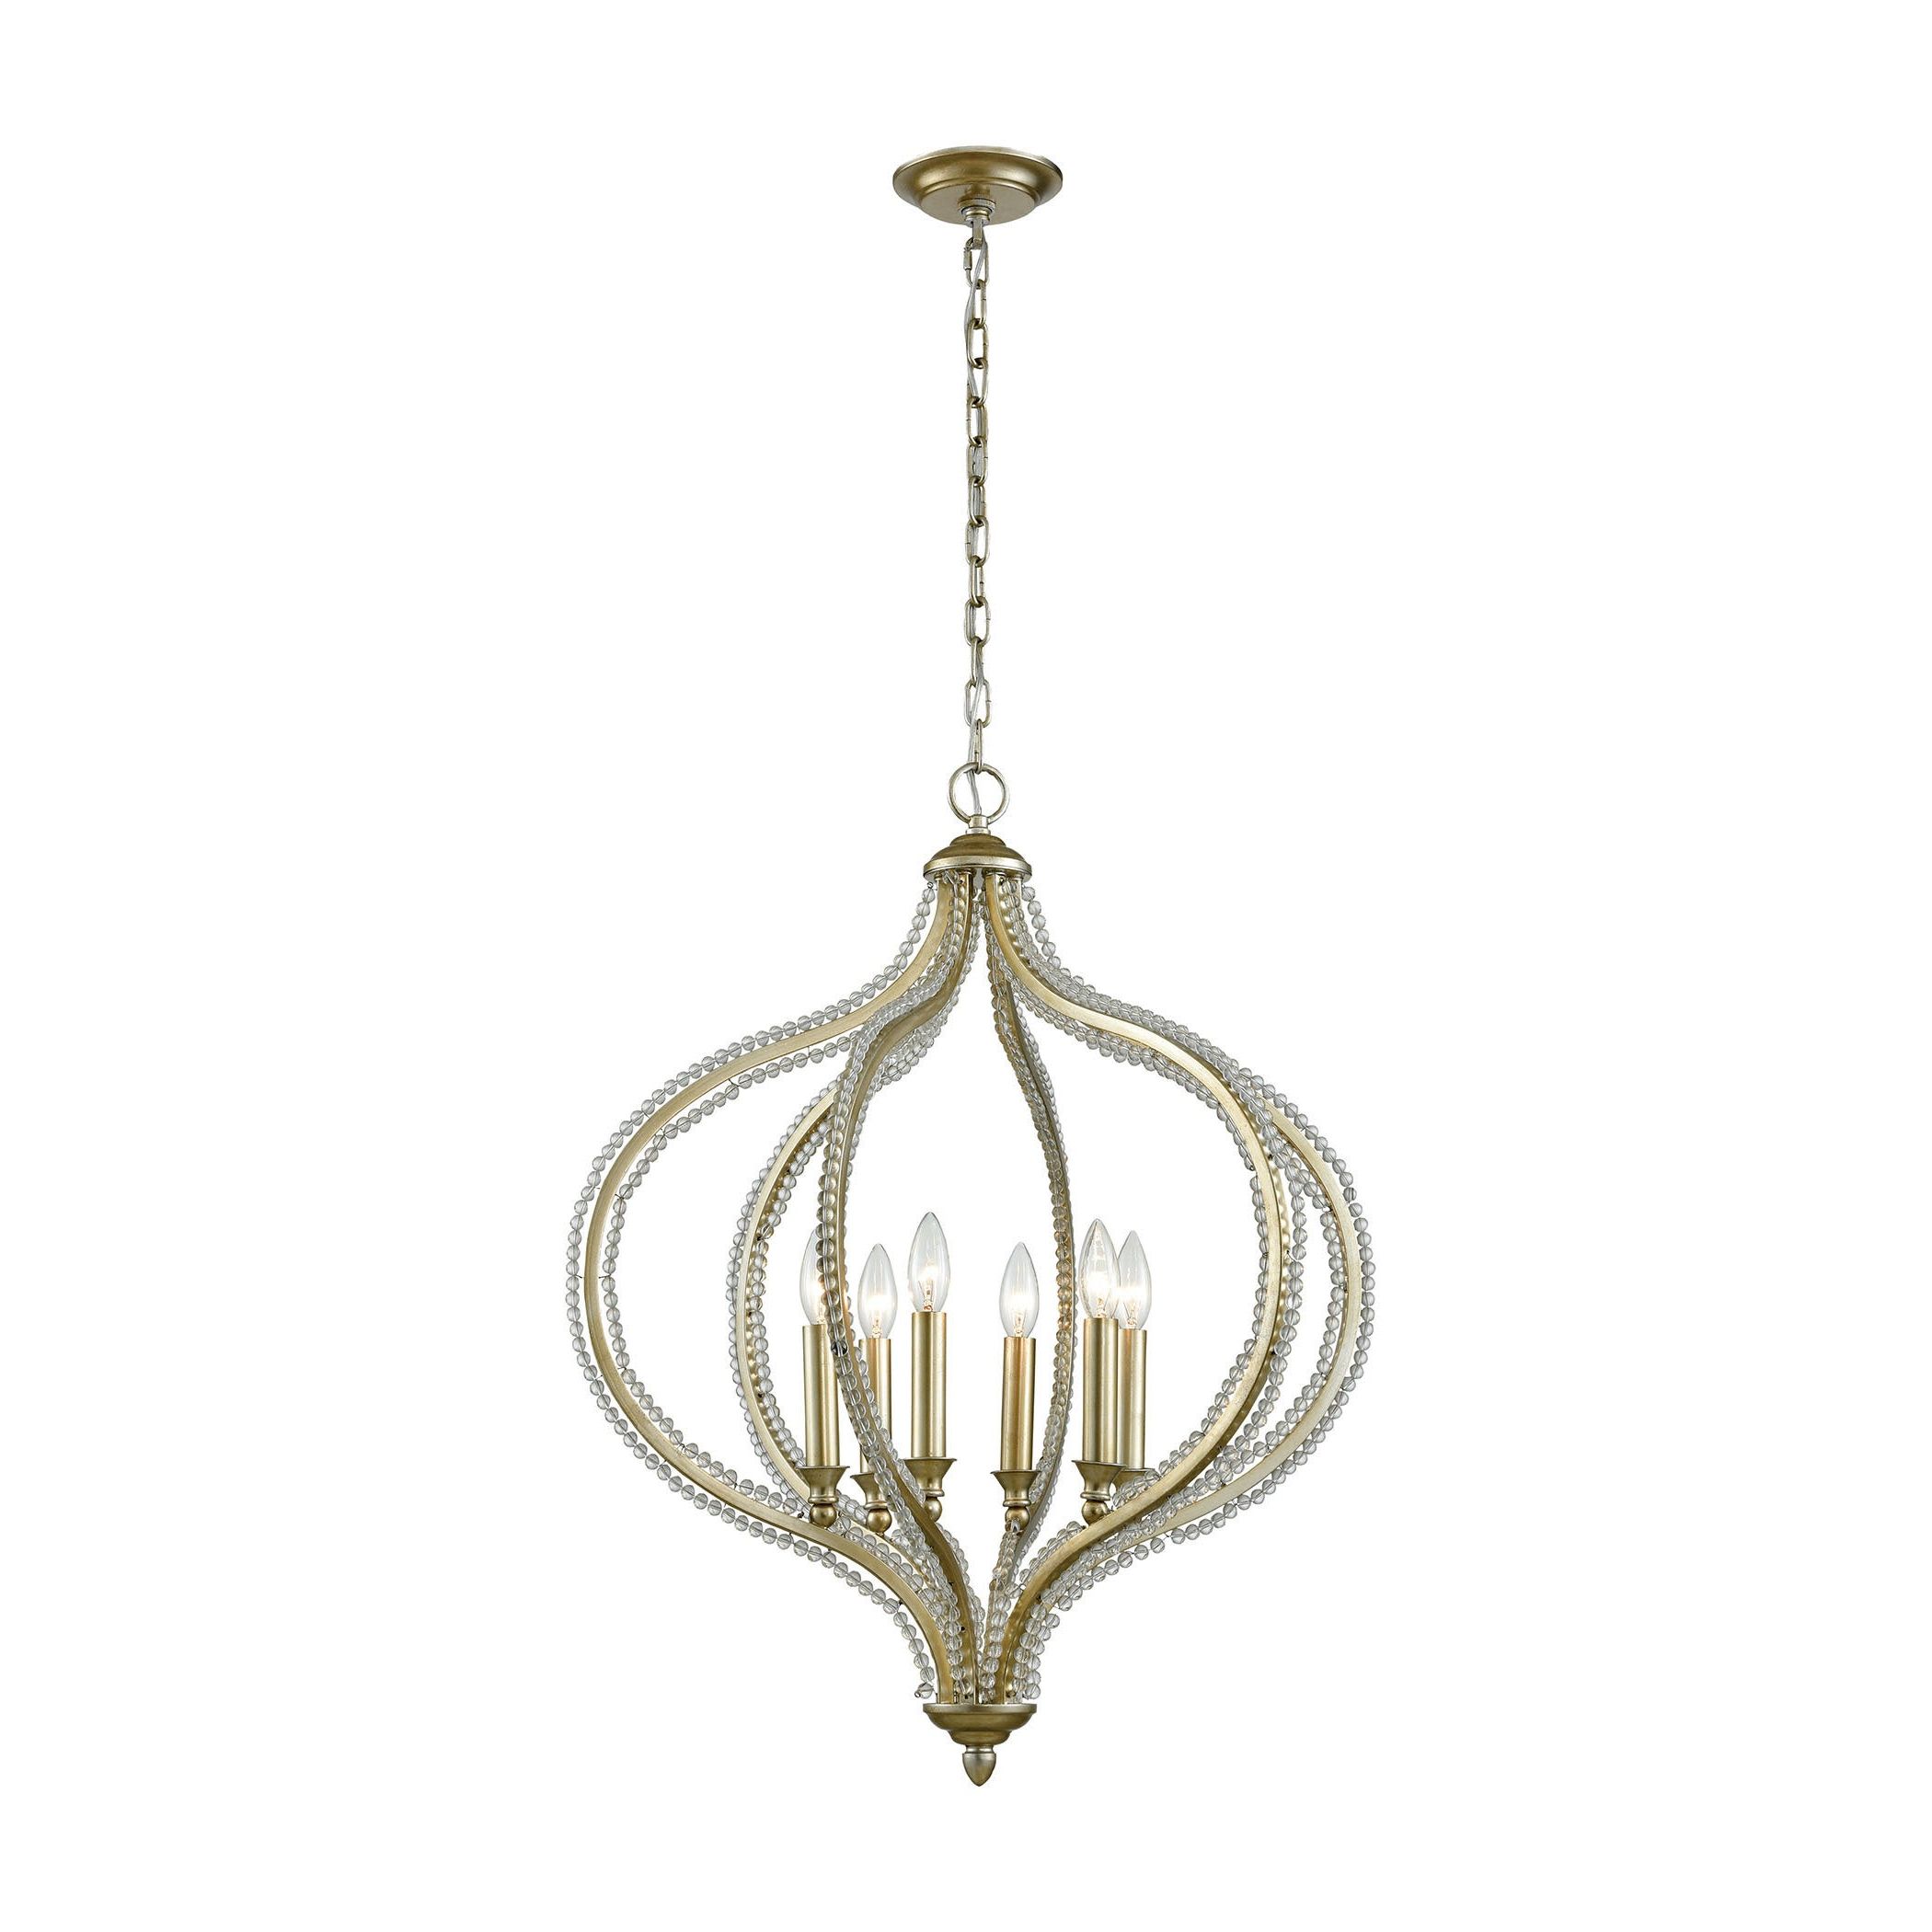 Bennington 6 Light Candle Style Chandeliers Intended For Recent Bennington 6 Light Pendant, Aged Silver (View 12 of 20)